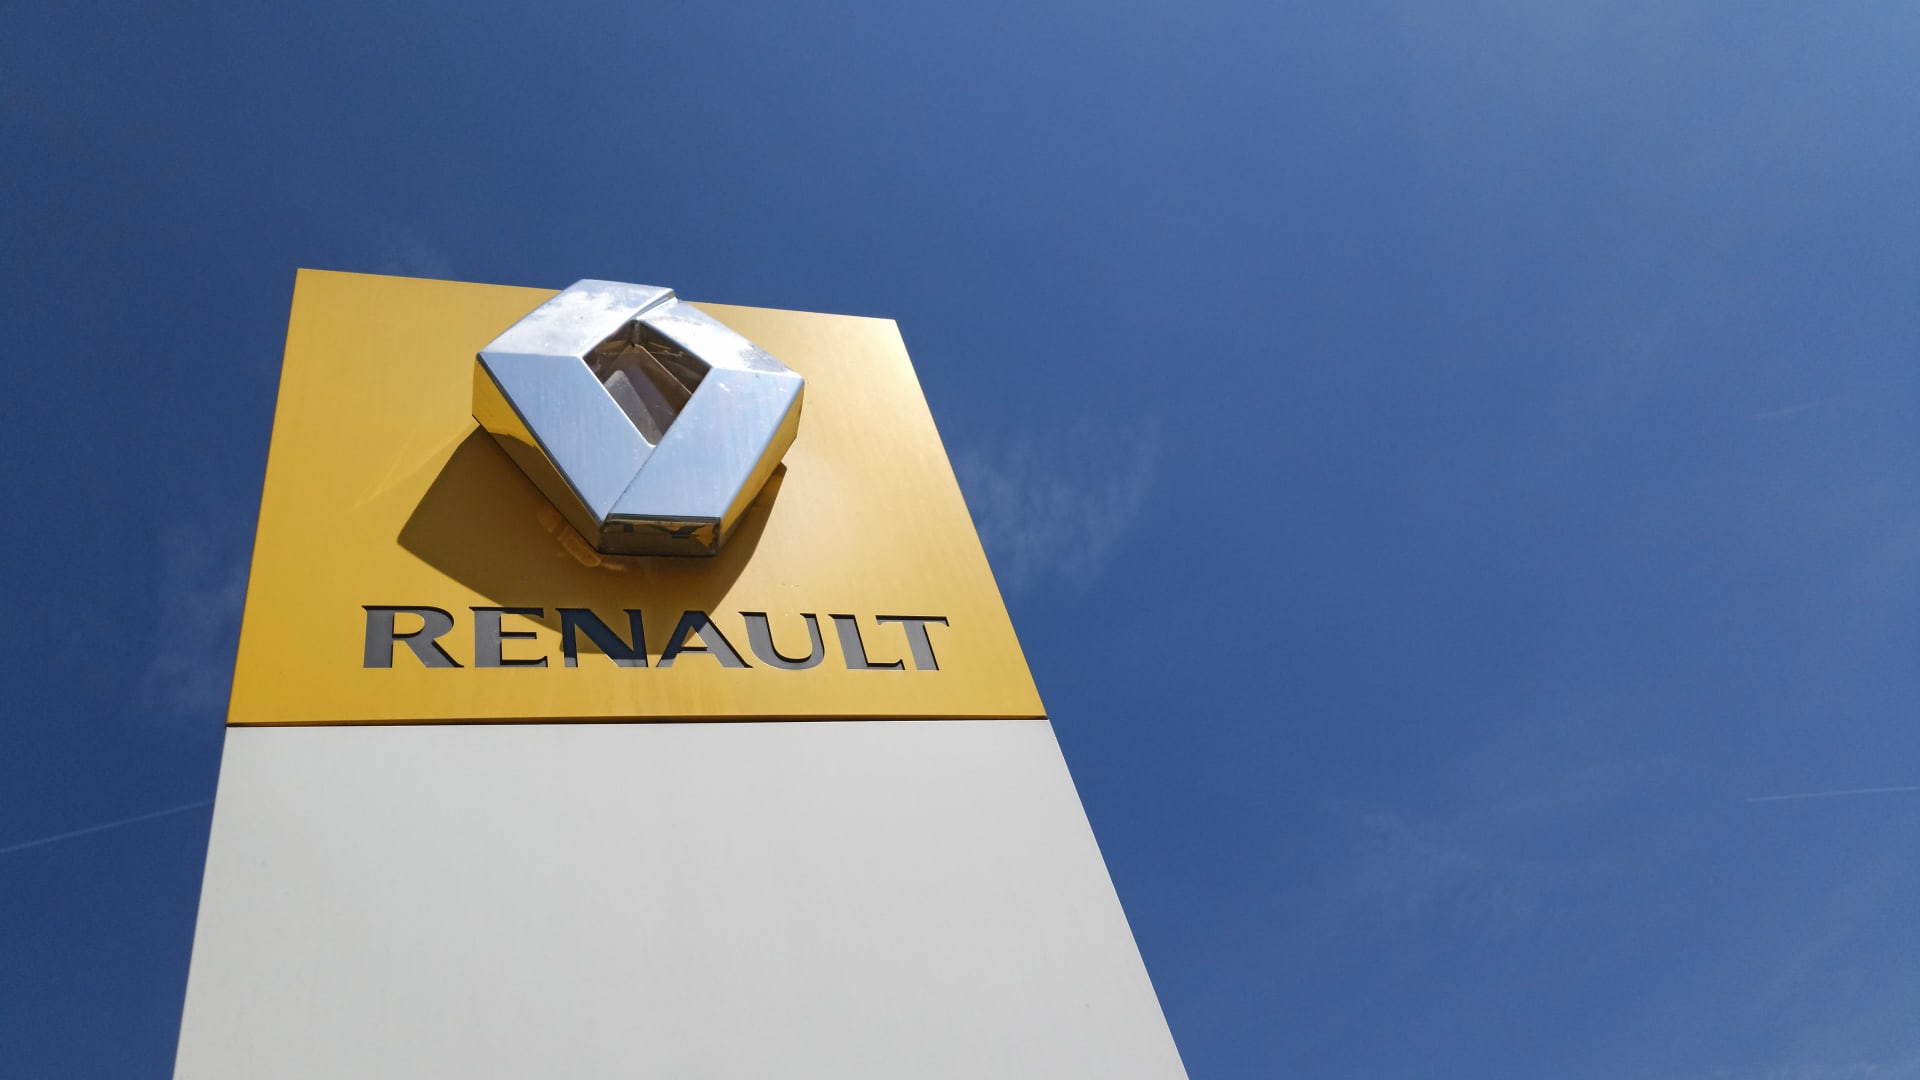 Renault wants to use water from depths of 4,000 meters to supply heat to an old production plant Auto Recent